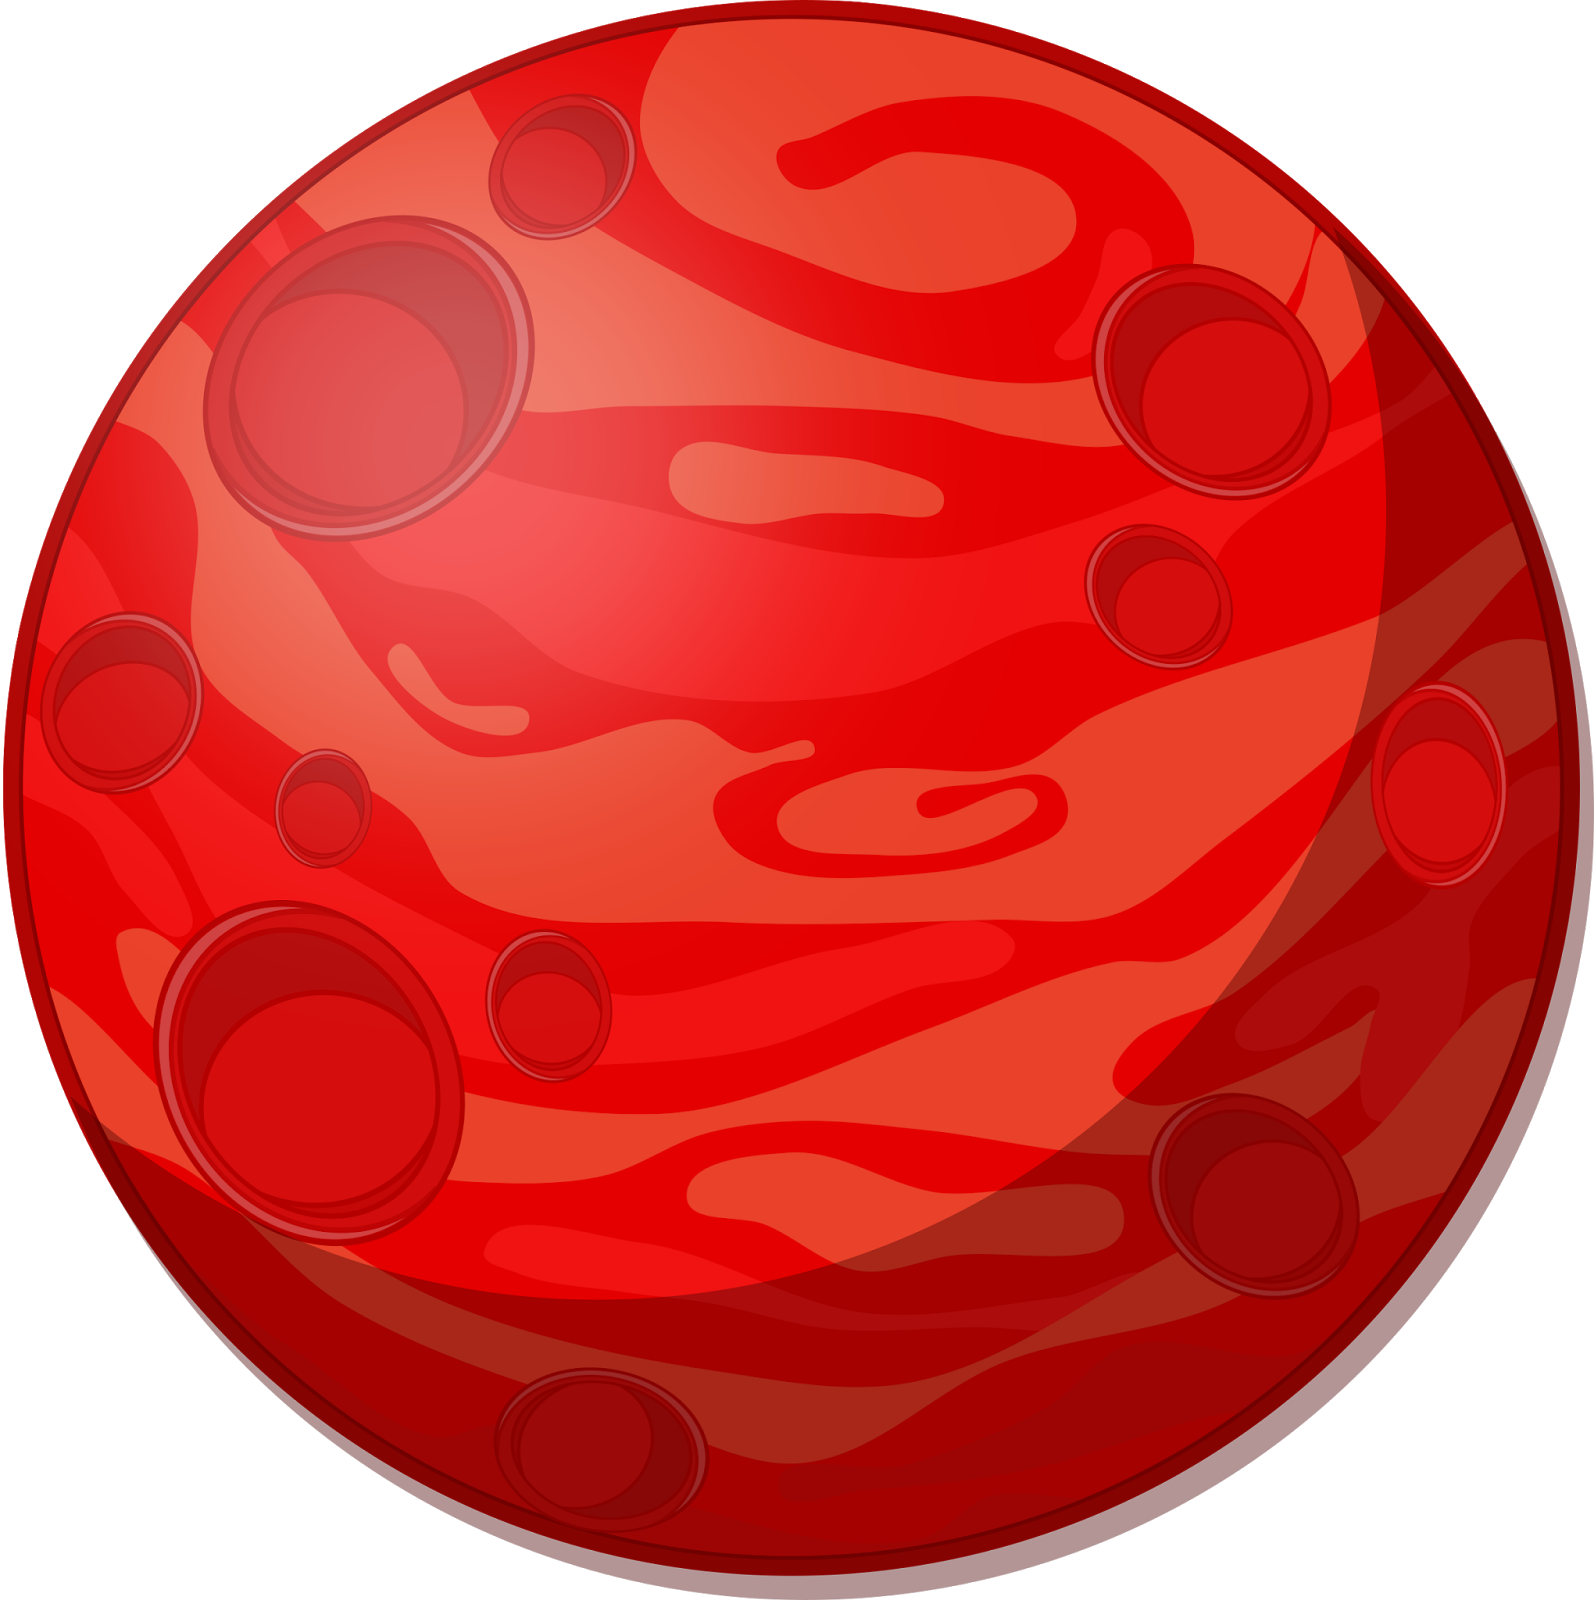 planets clipart 8 planet